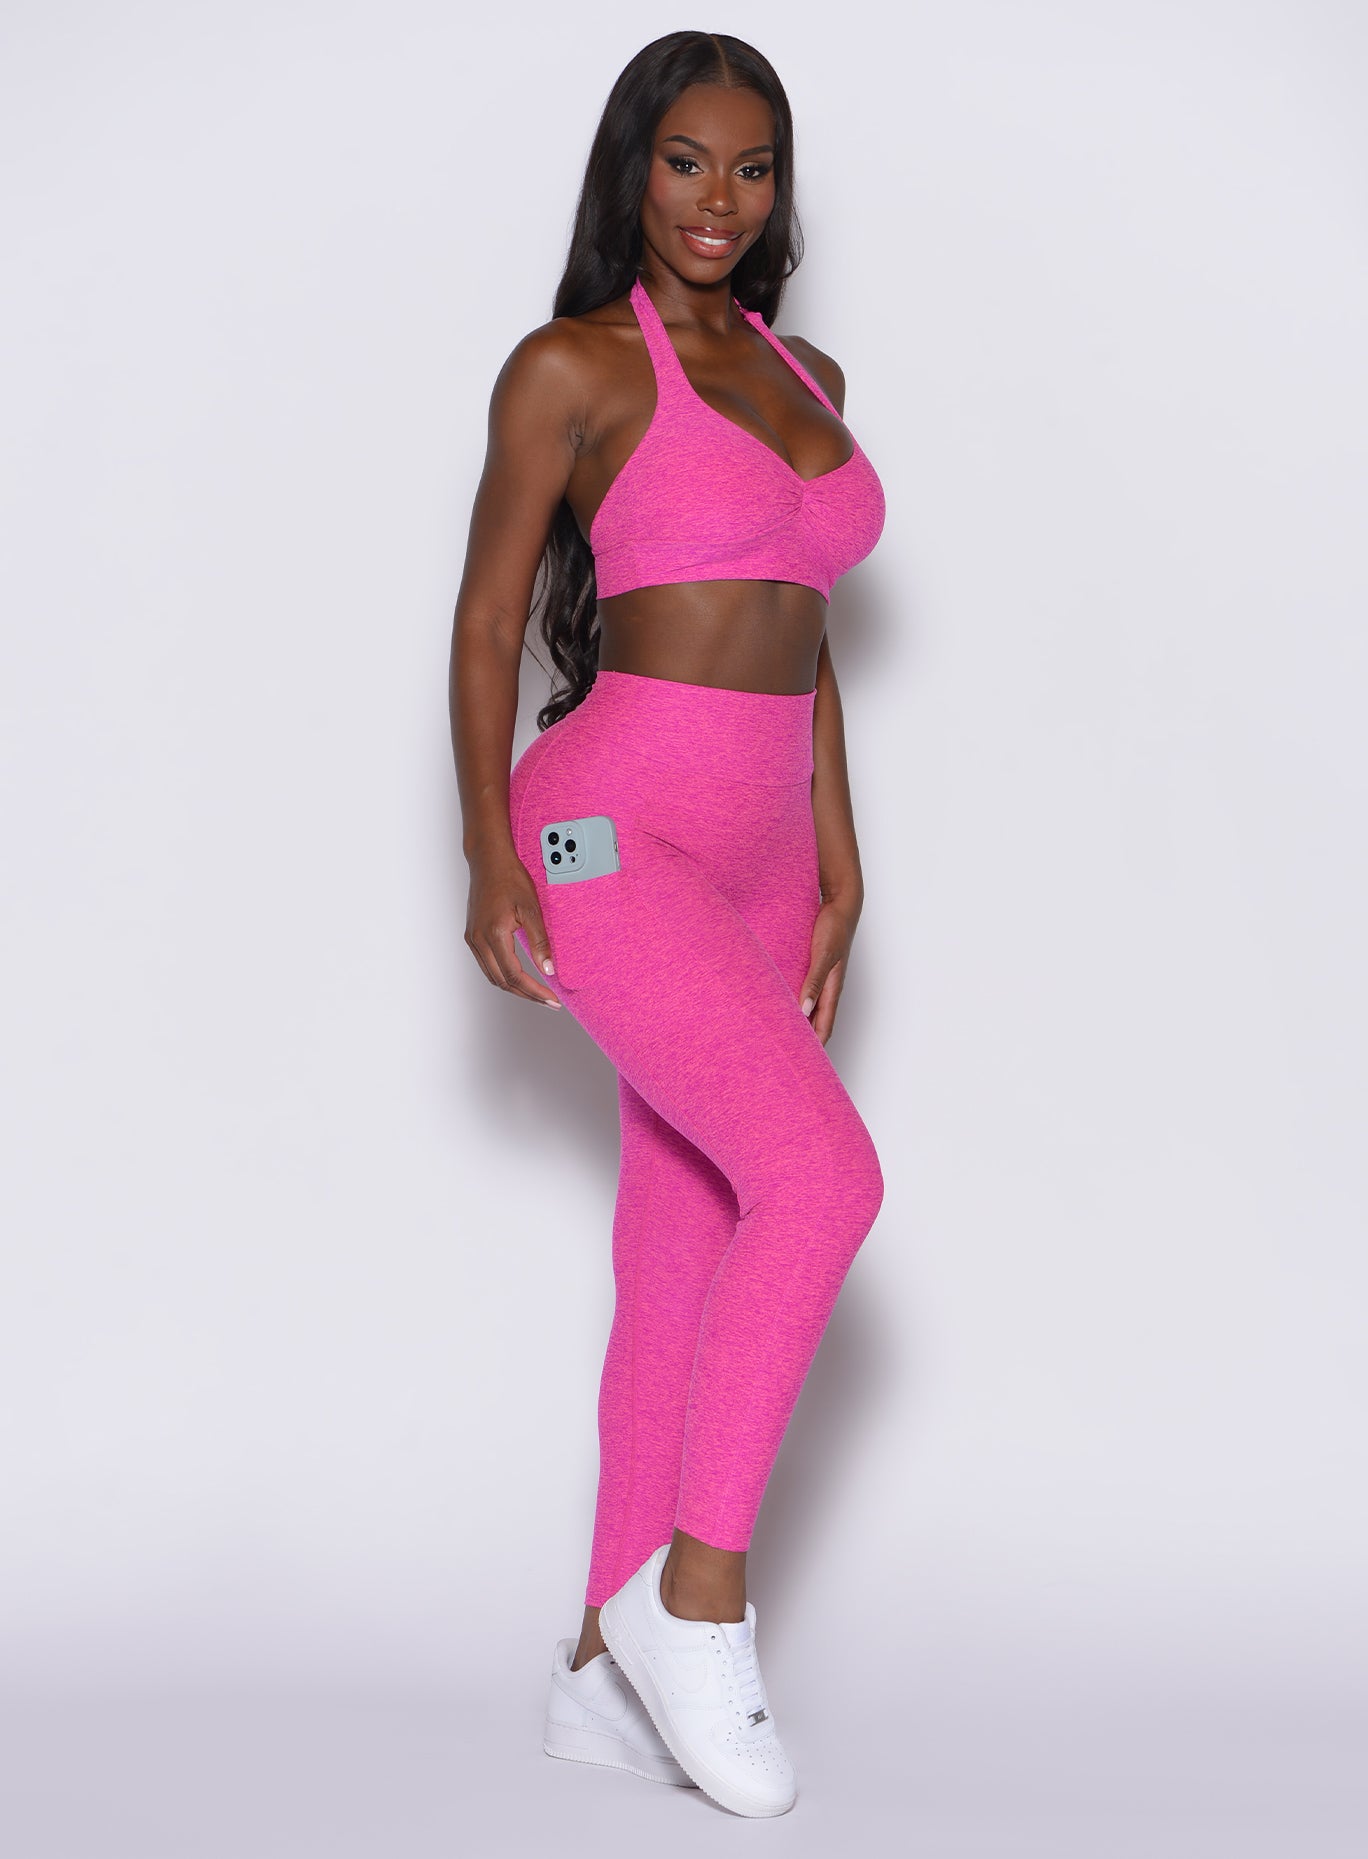 left side profile view of a model angled right wearing our V back leggings in Neon pink sorbet color along with a matching bra